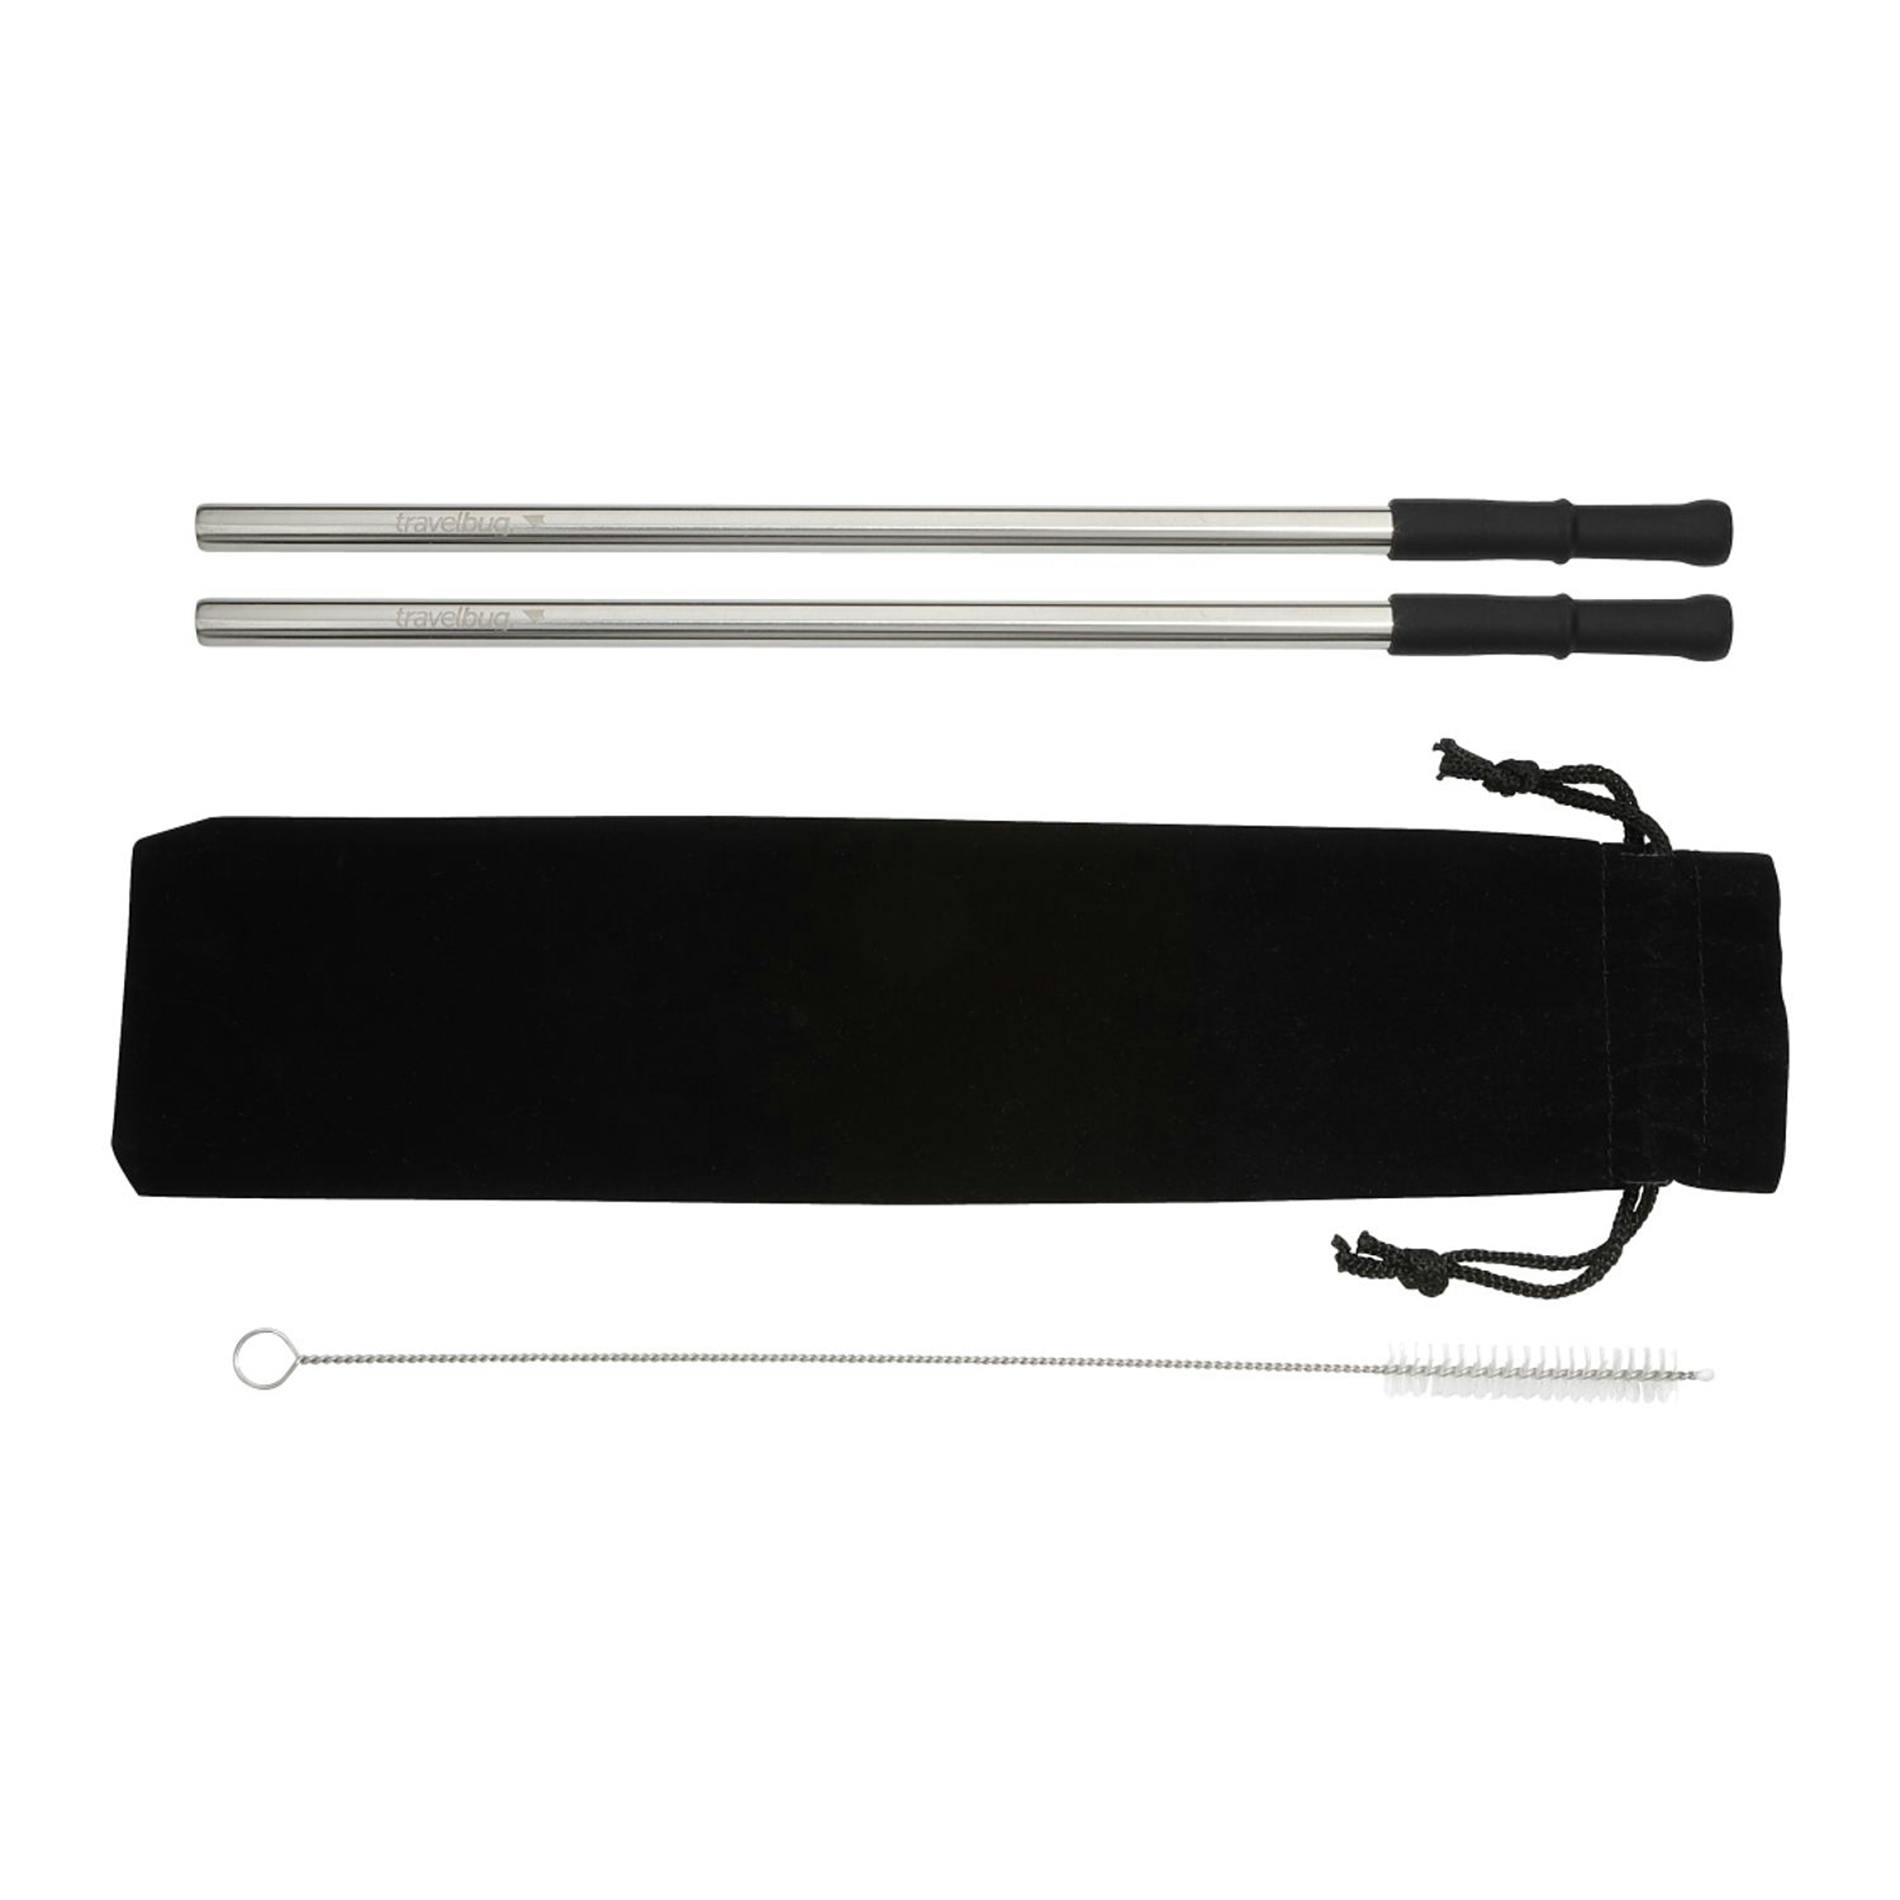 Reusable Stainless steel Straw Set with Brush - additional Image 2